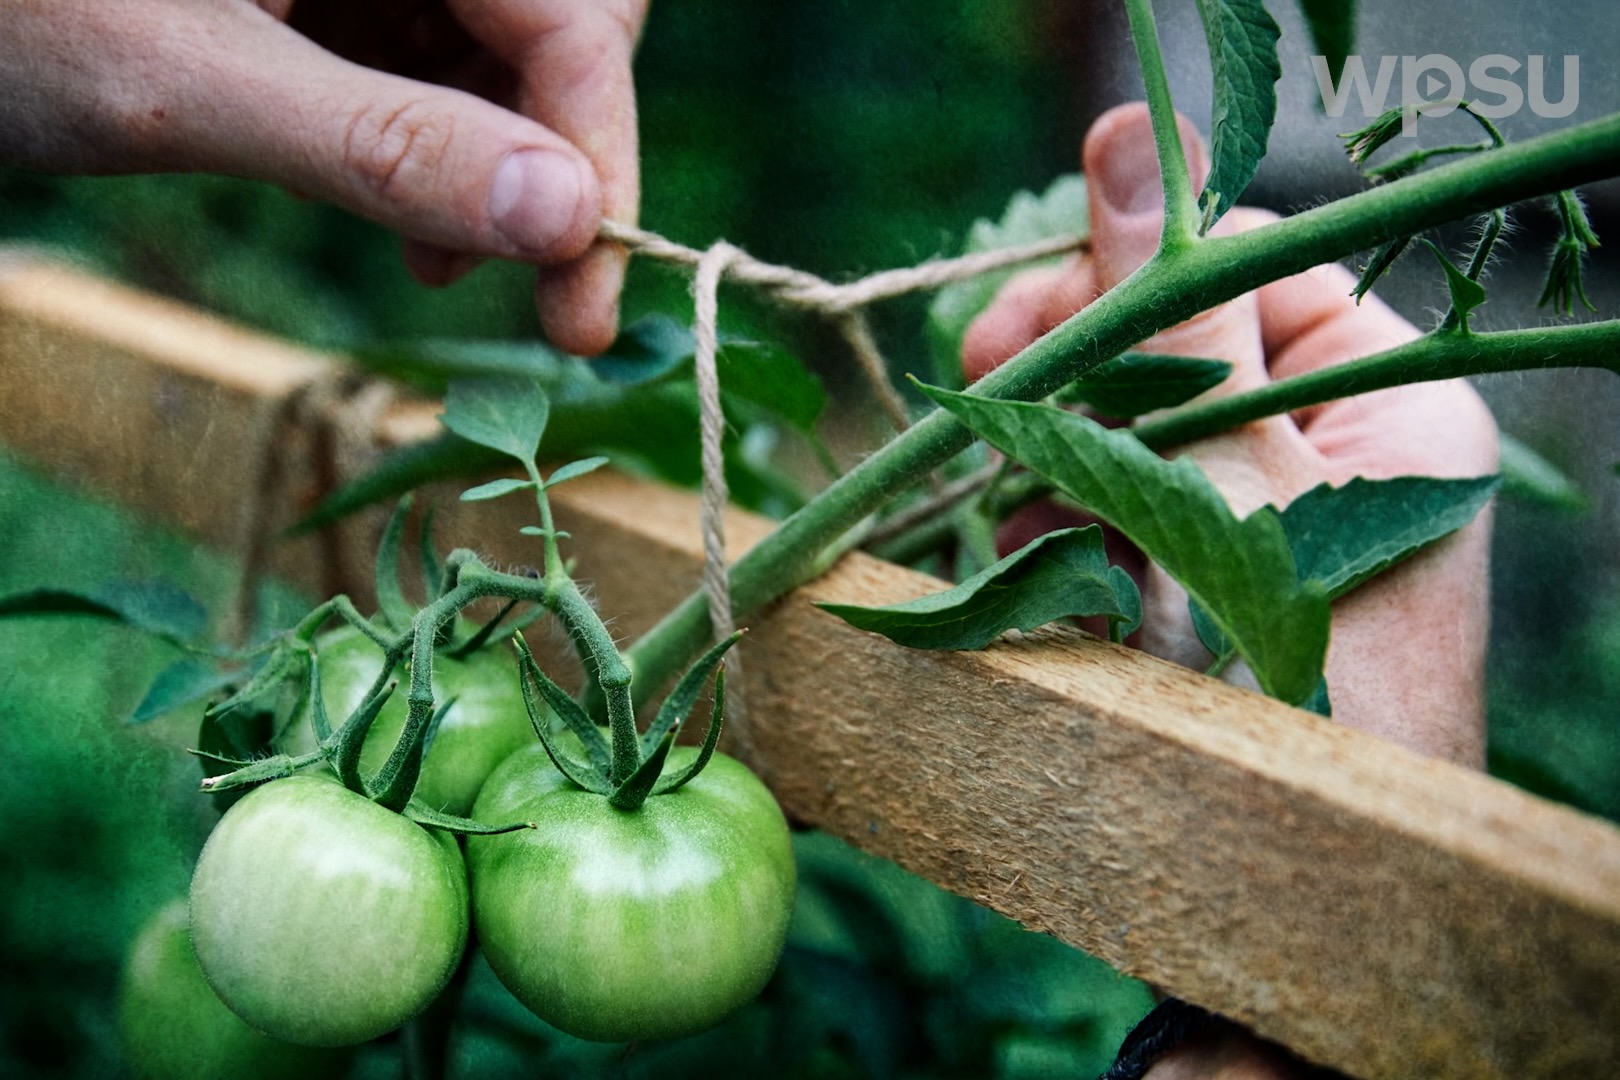 A gardener tying green tomatoes to a garden trellis with twine.